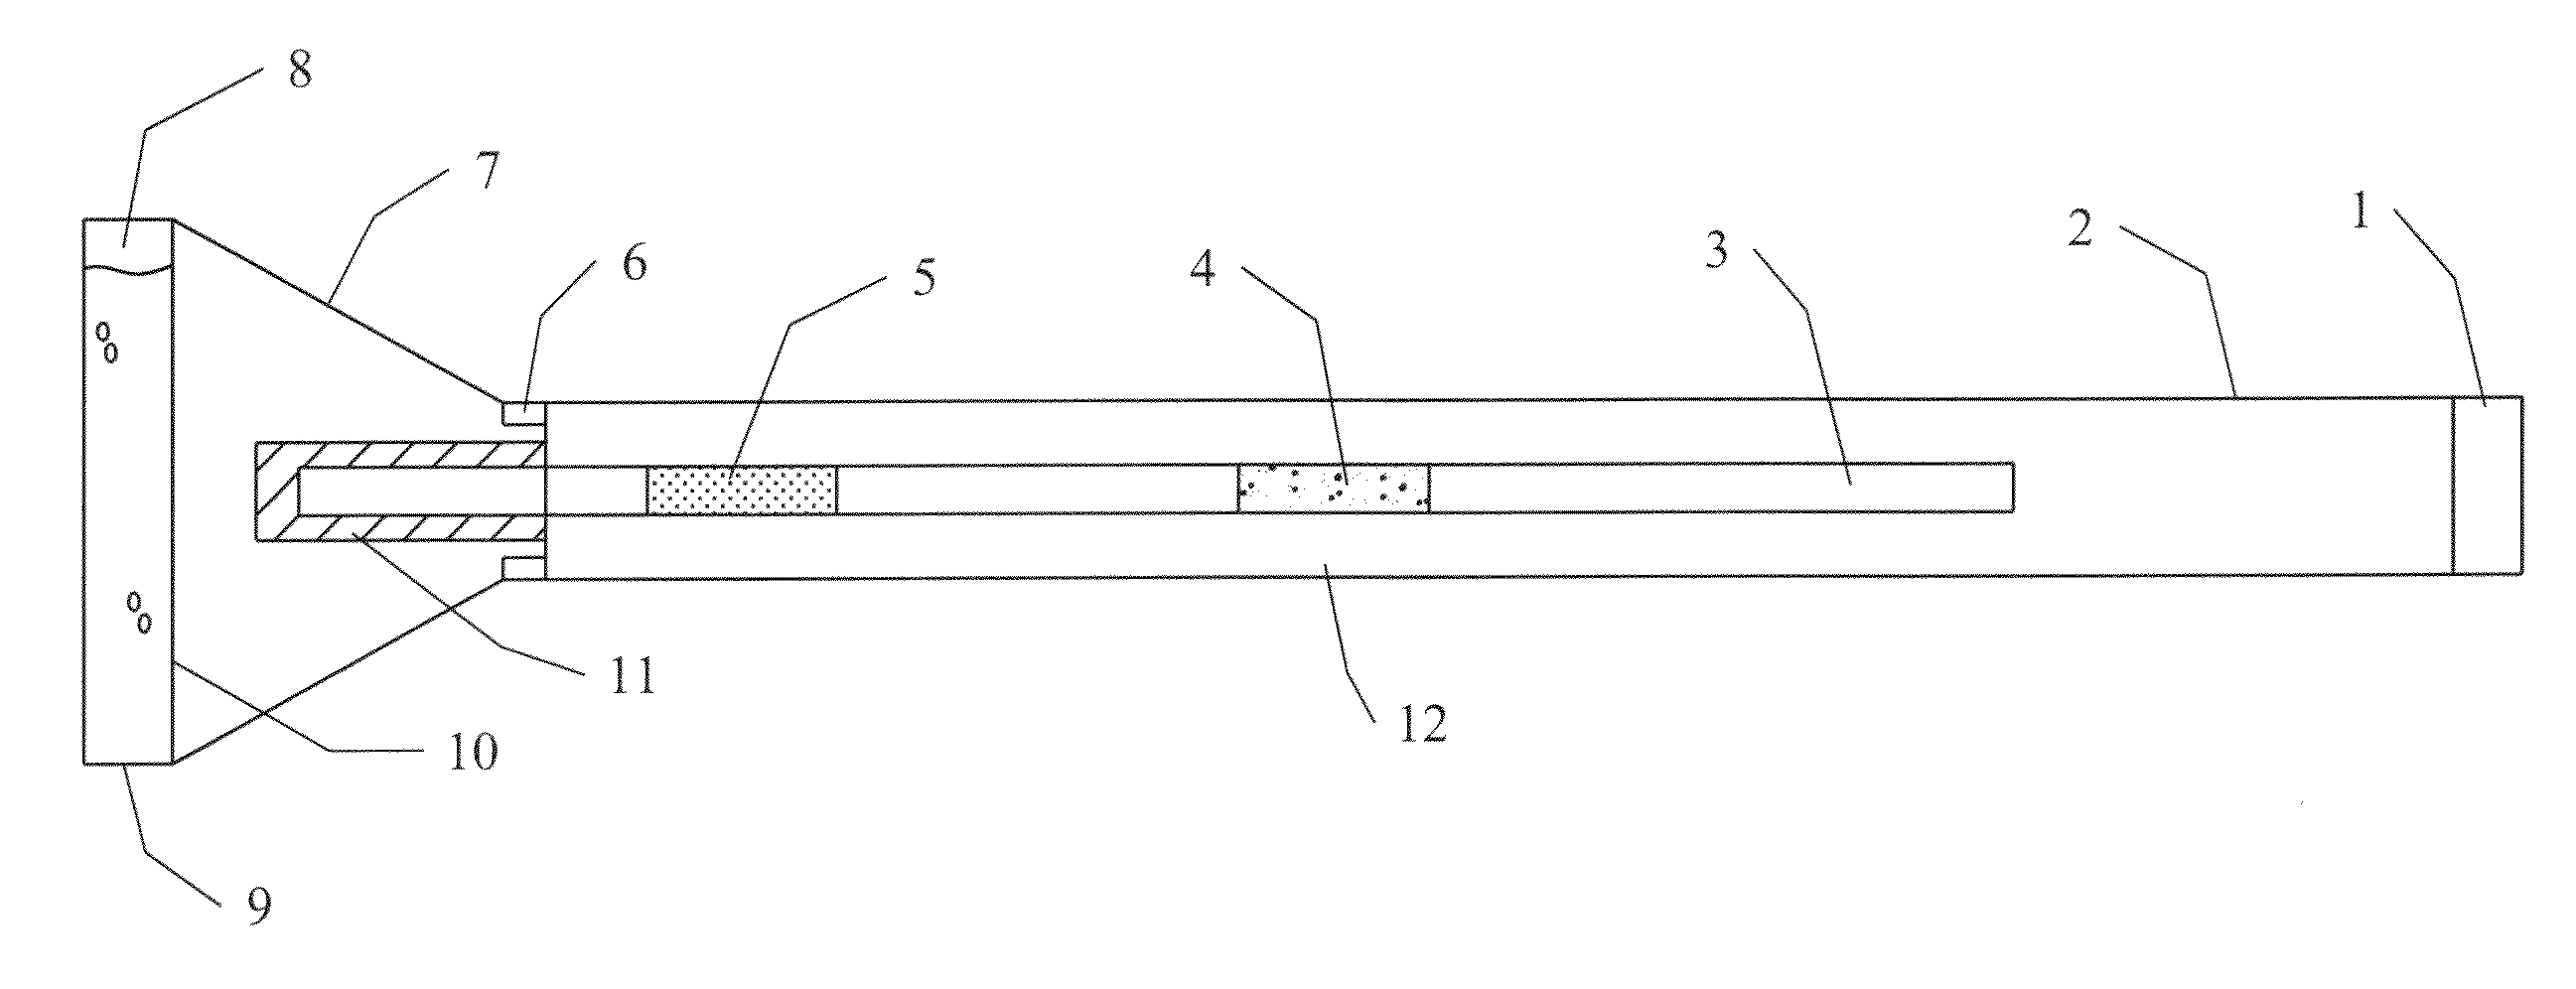 Devices and methods for the collection and detection of substances